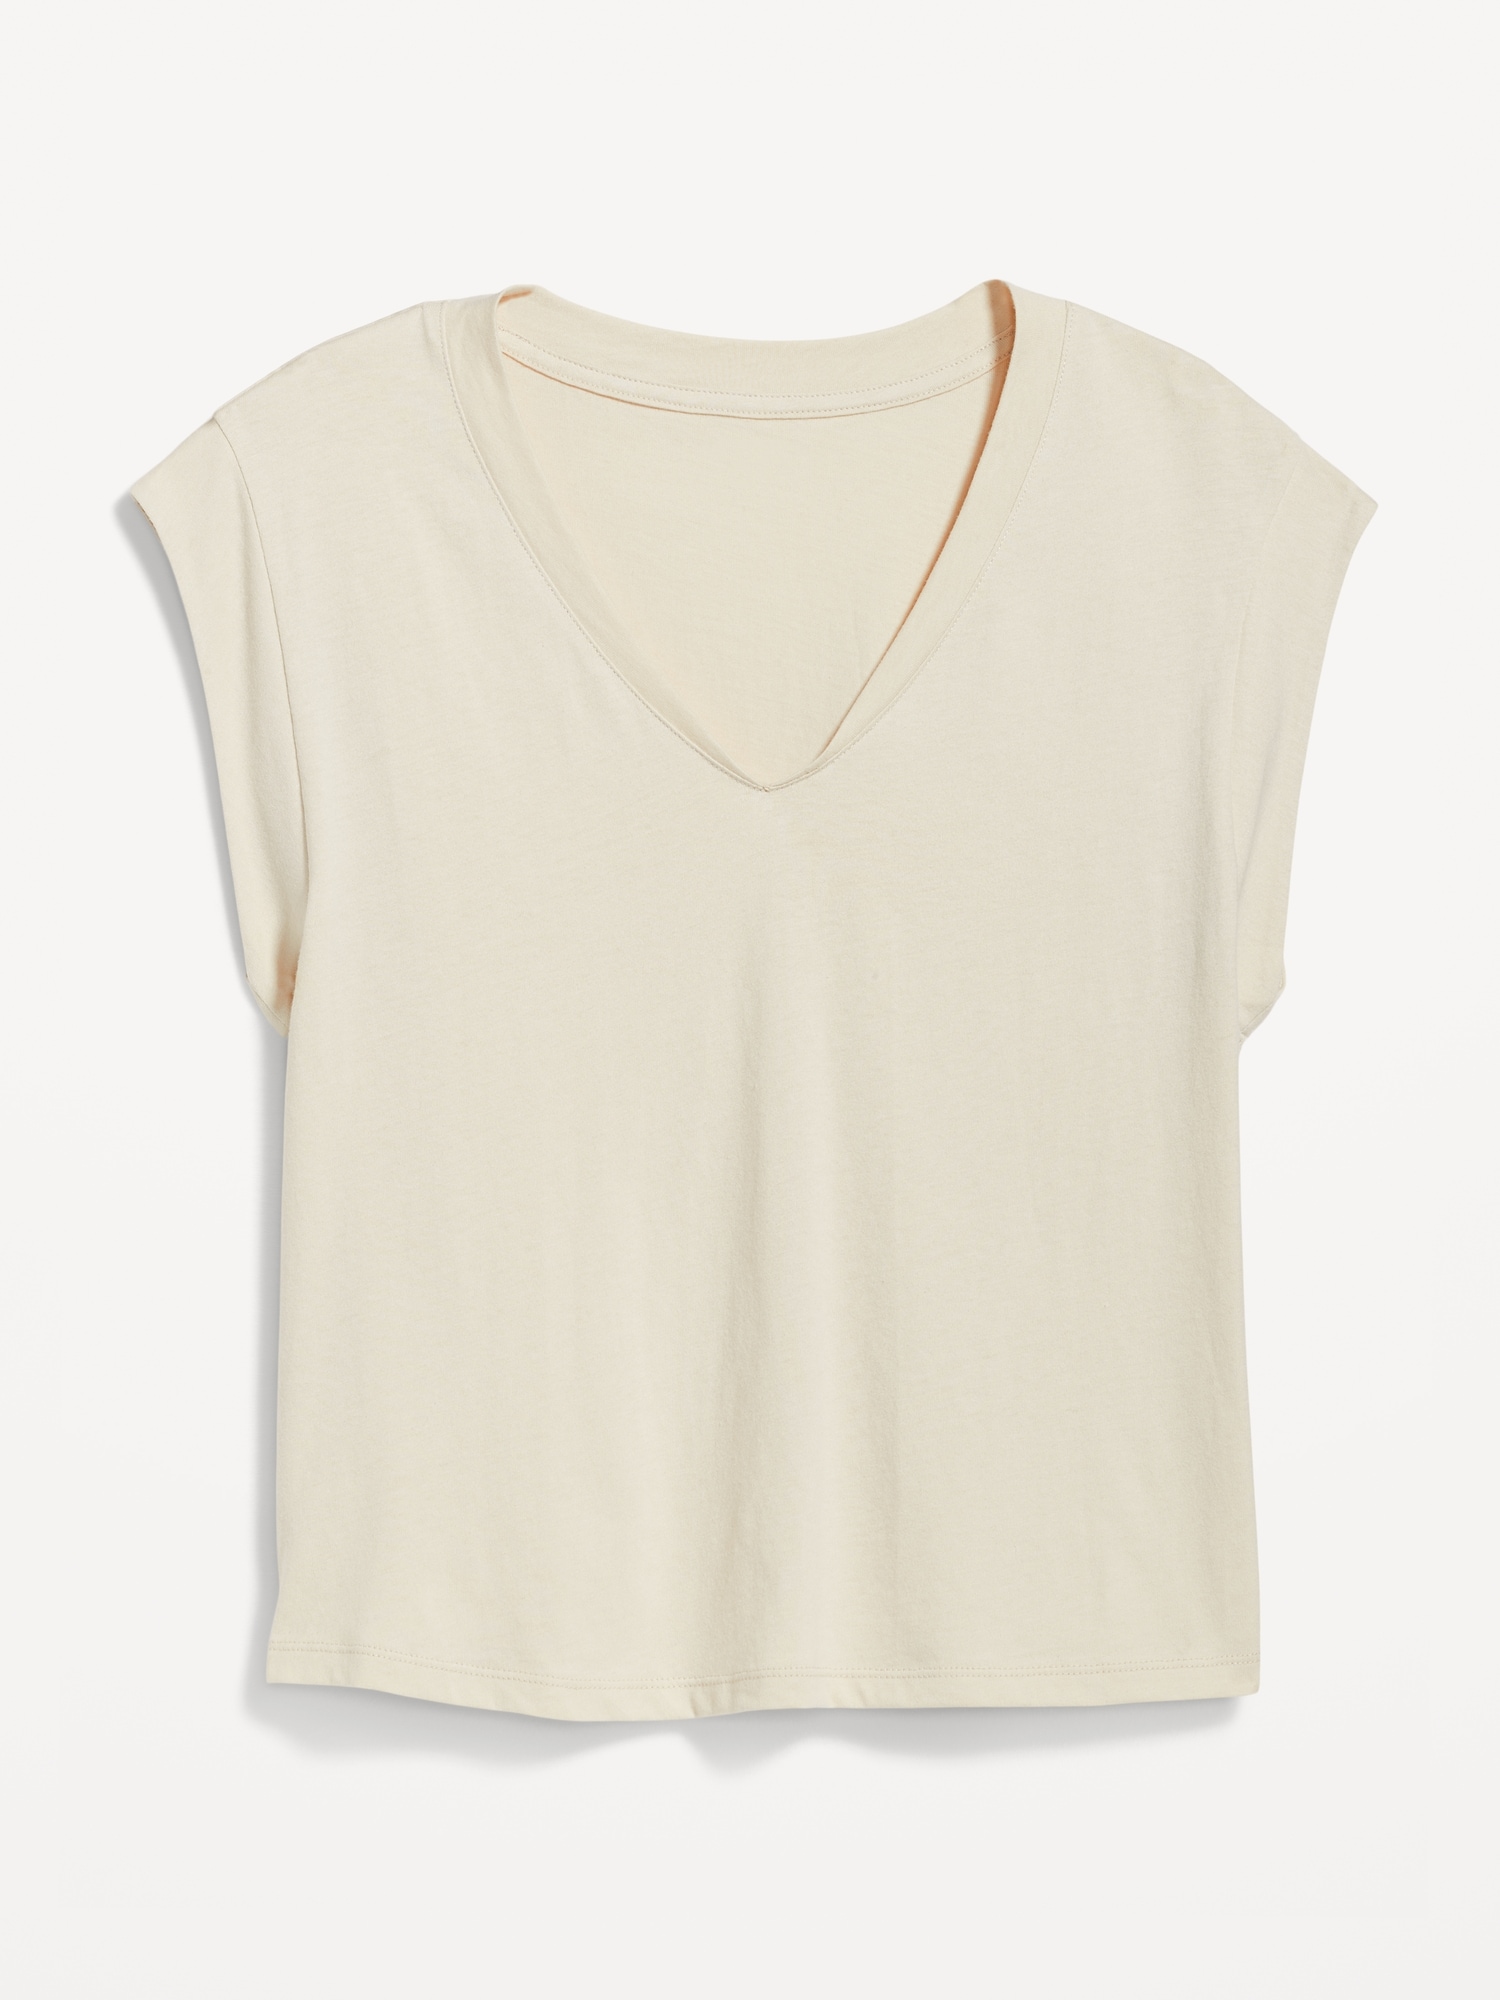 Luxe Sleeveless Top for Women